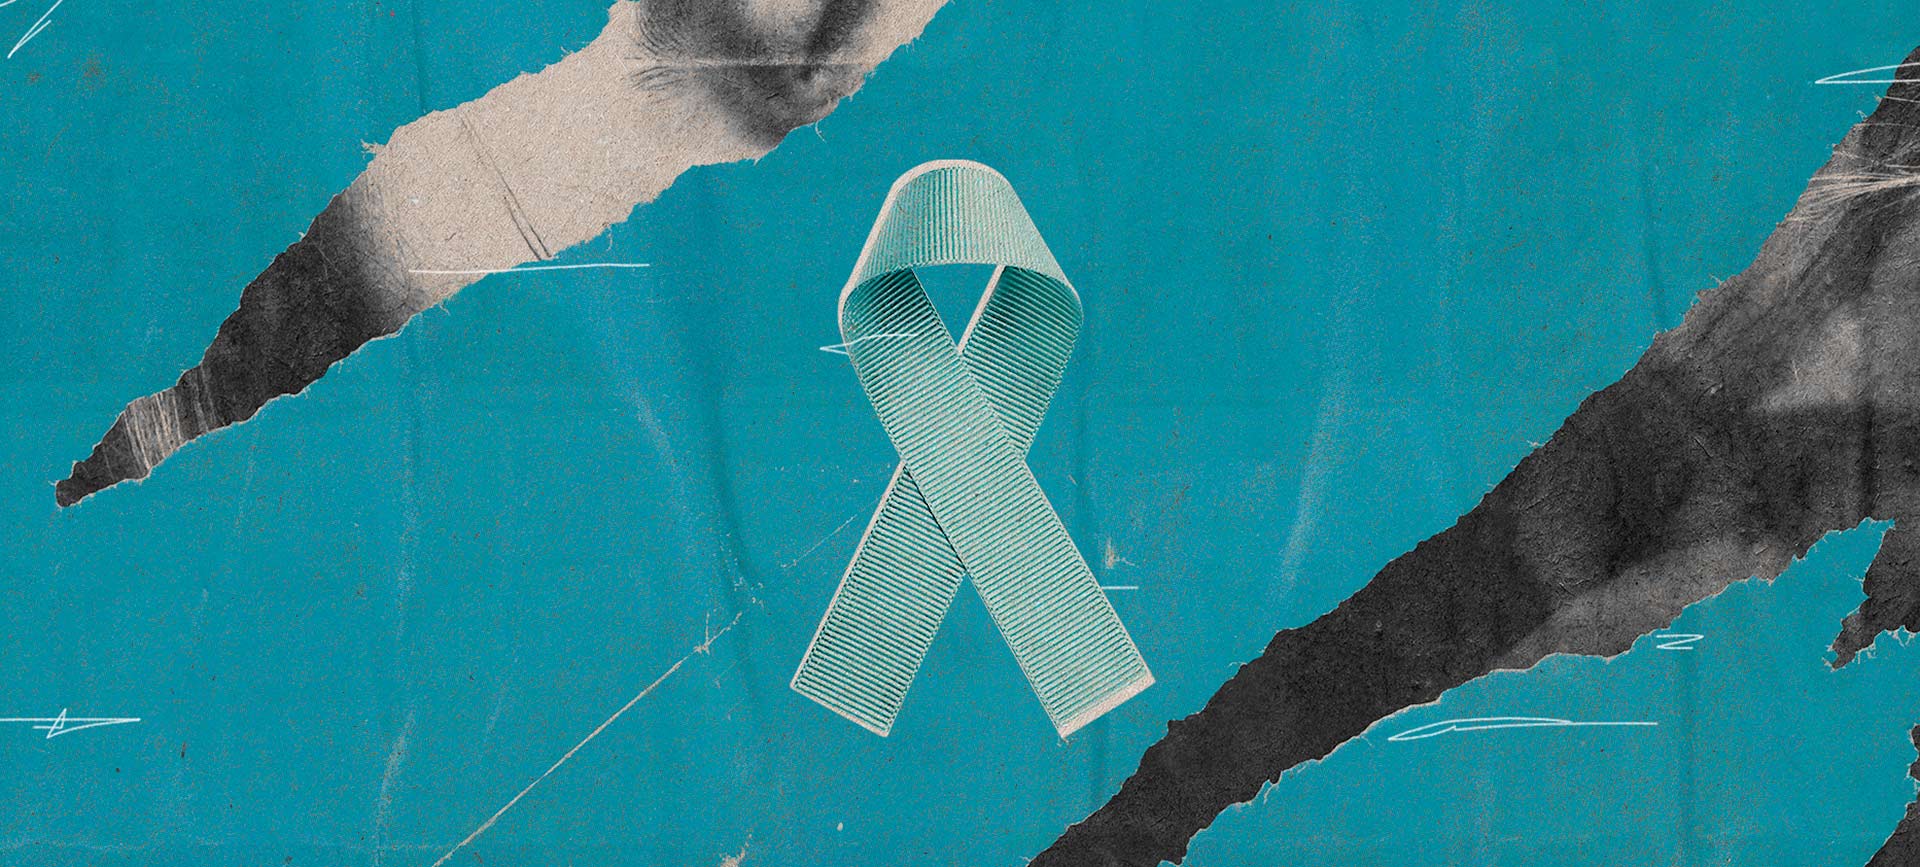 Teal cervical cancer ribbon made of fabric is against a teal background of a torn page.